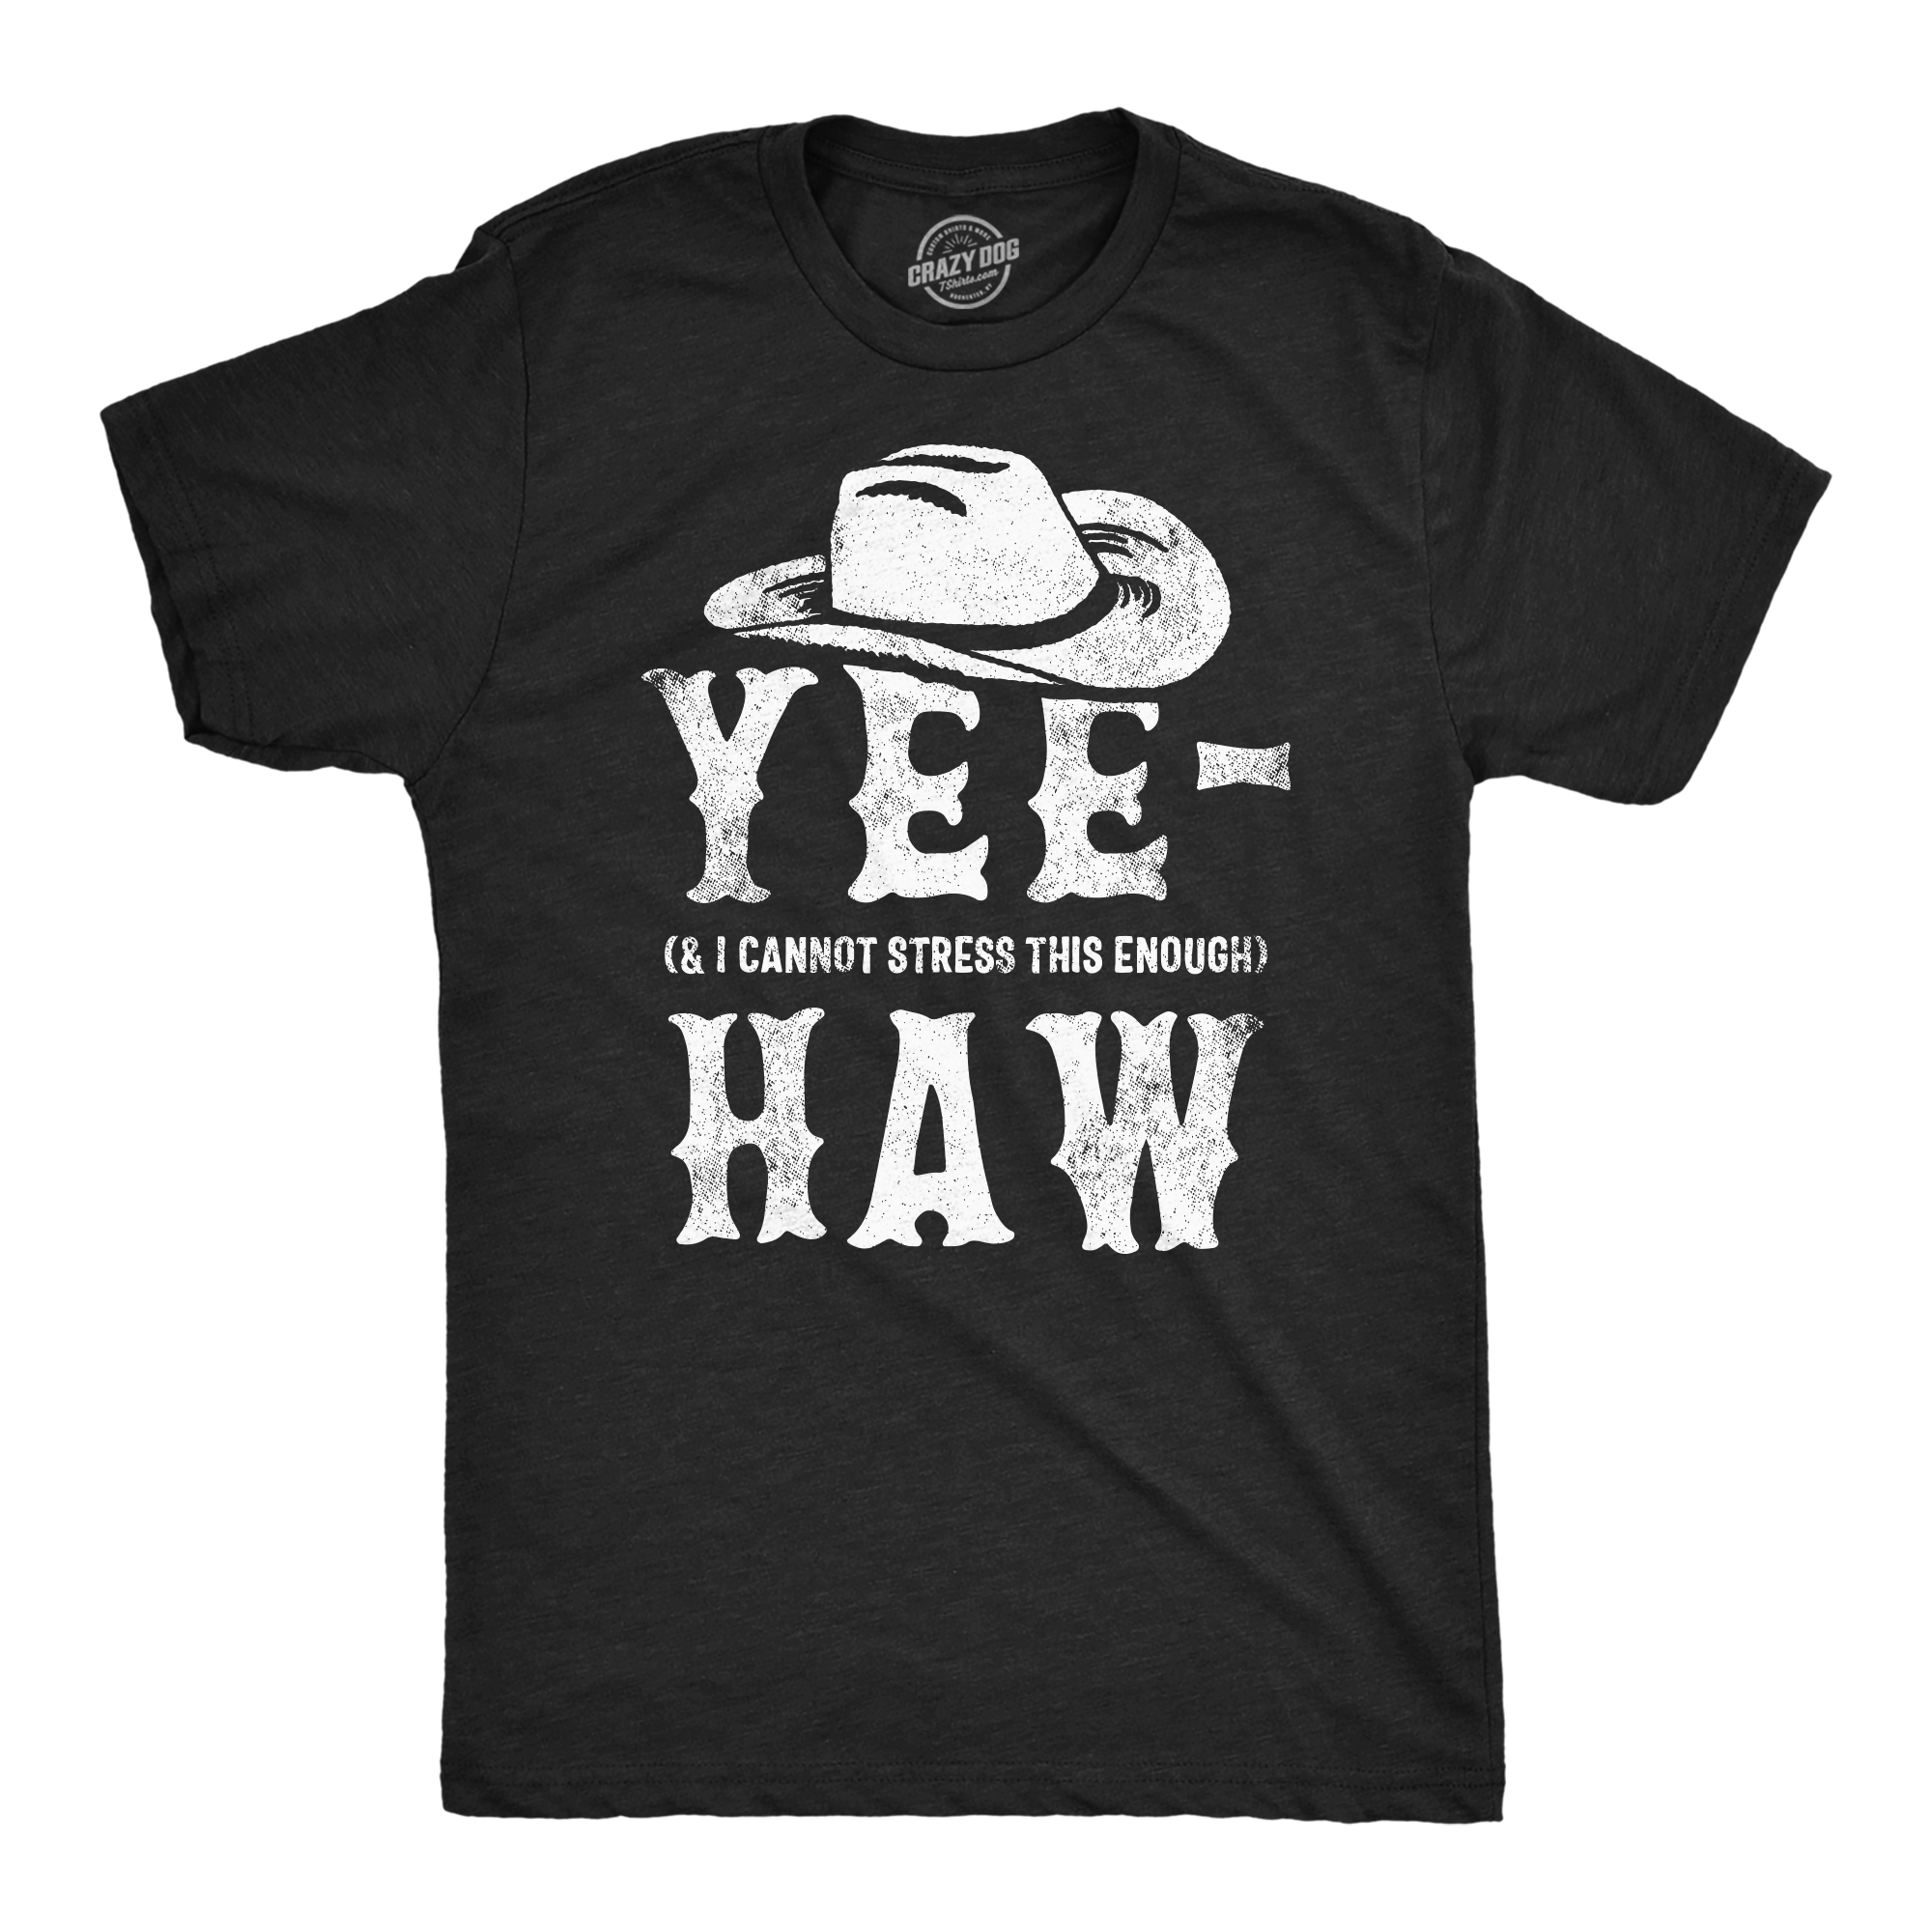 Funny Heather Black - Yee Cannot Stress Haw Yee And I Cannot Stress This Enough Haw Mens T Shirt Nerdy sarcastic Tee